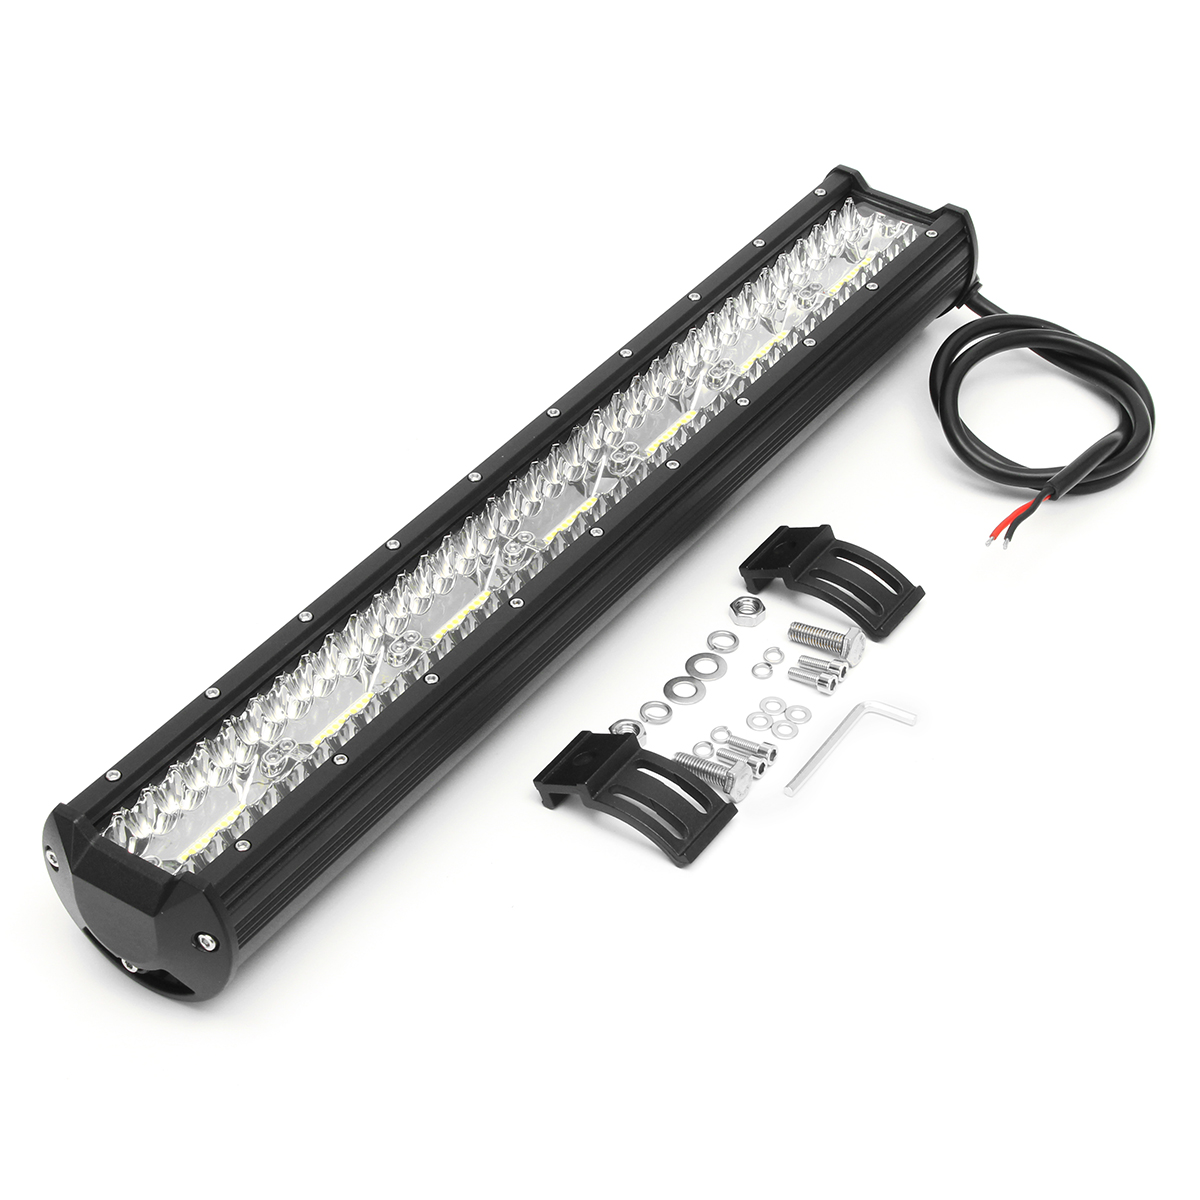 20Inch 420W Tri Row LED Work Light Bars Combo Beam IP68 Waterproof White for 0-30V off Road SUV Trailer Vehicle